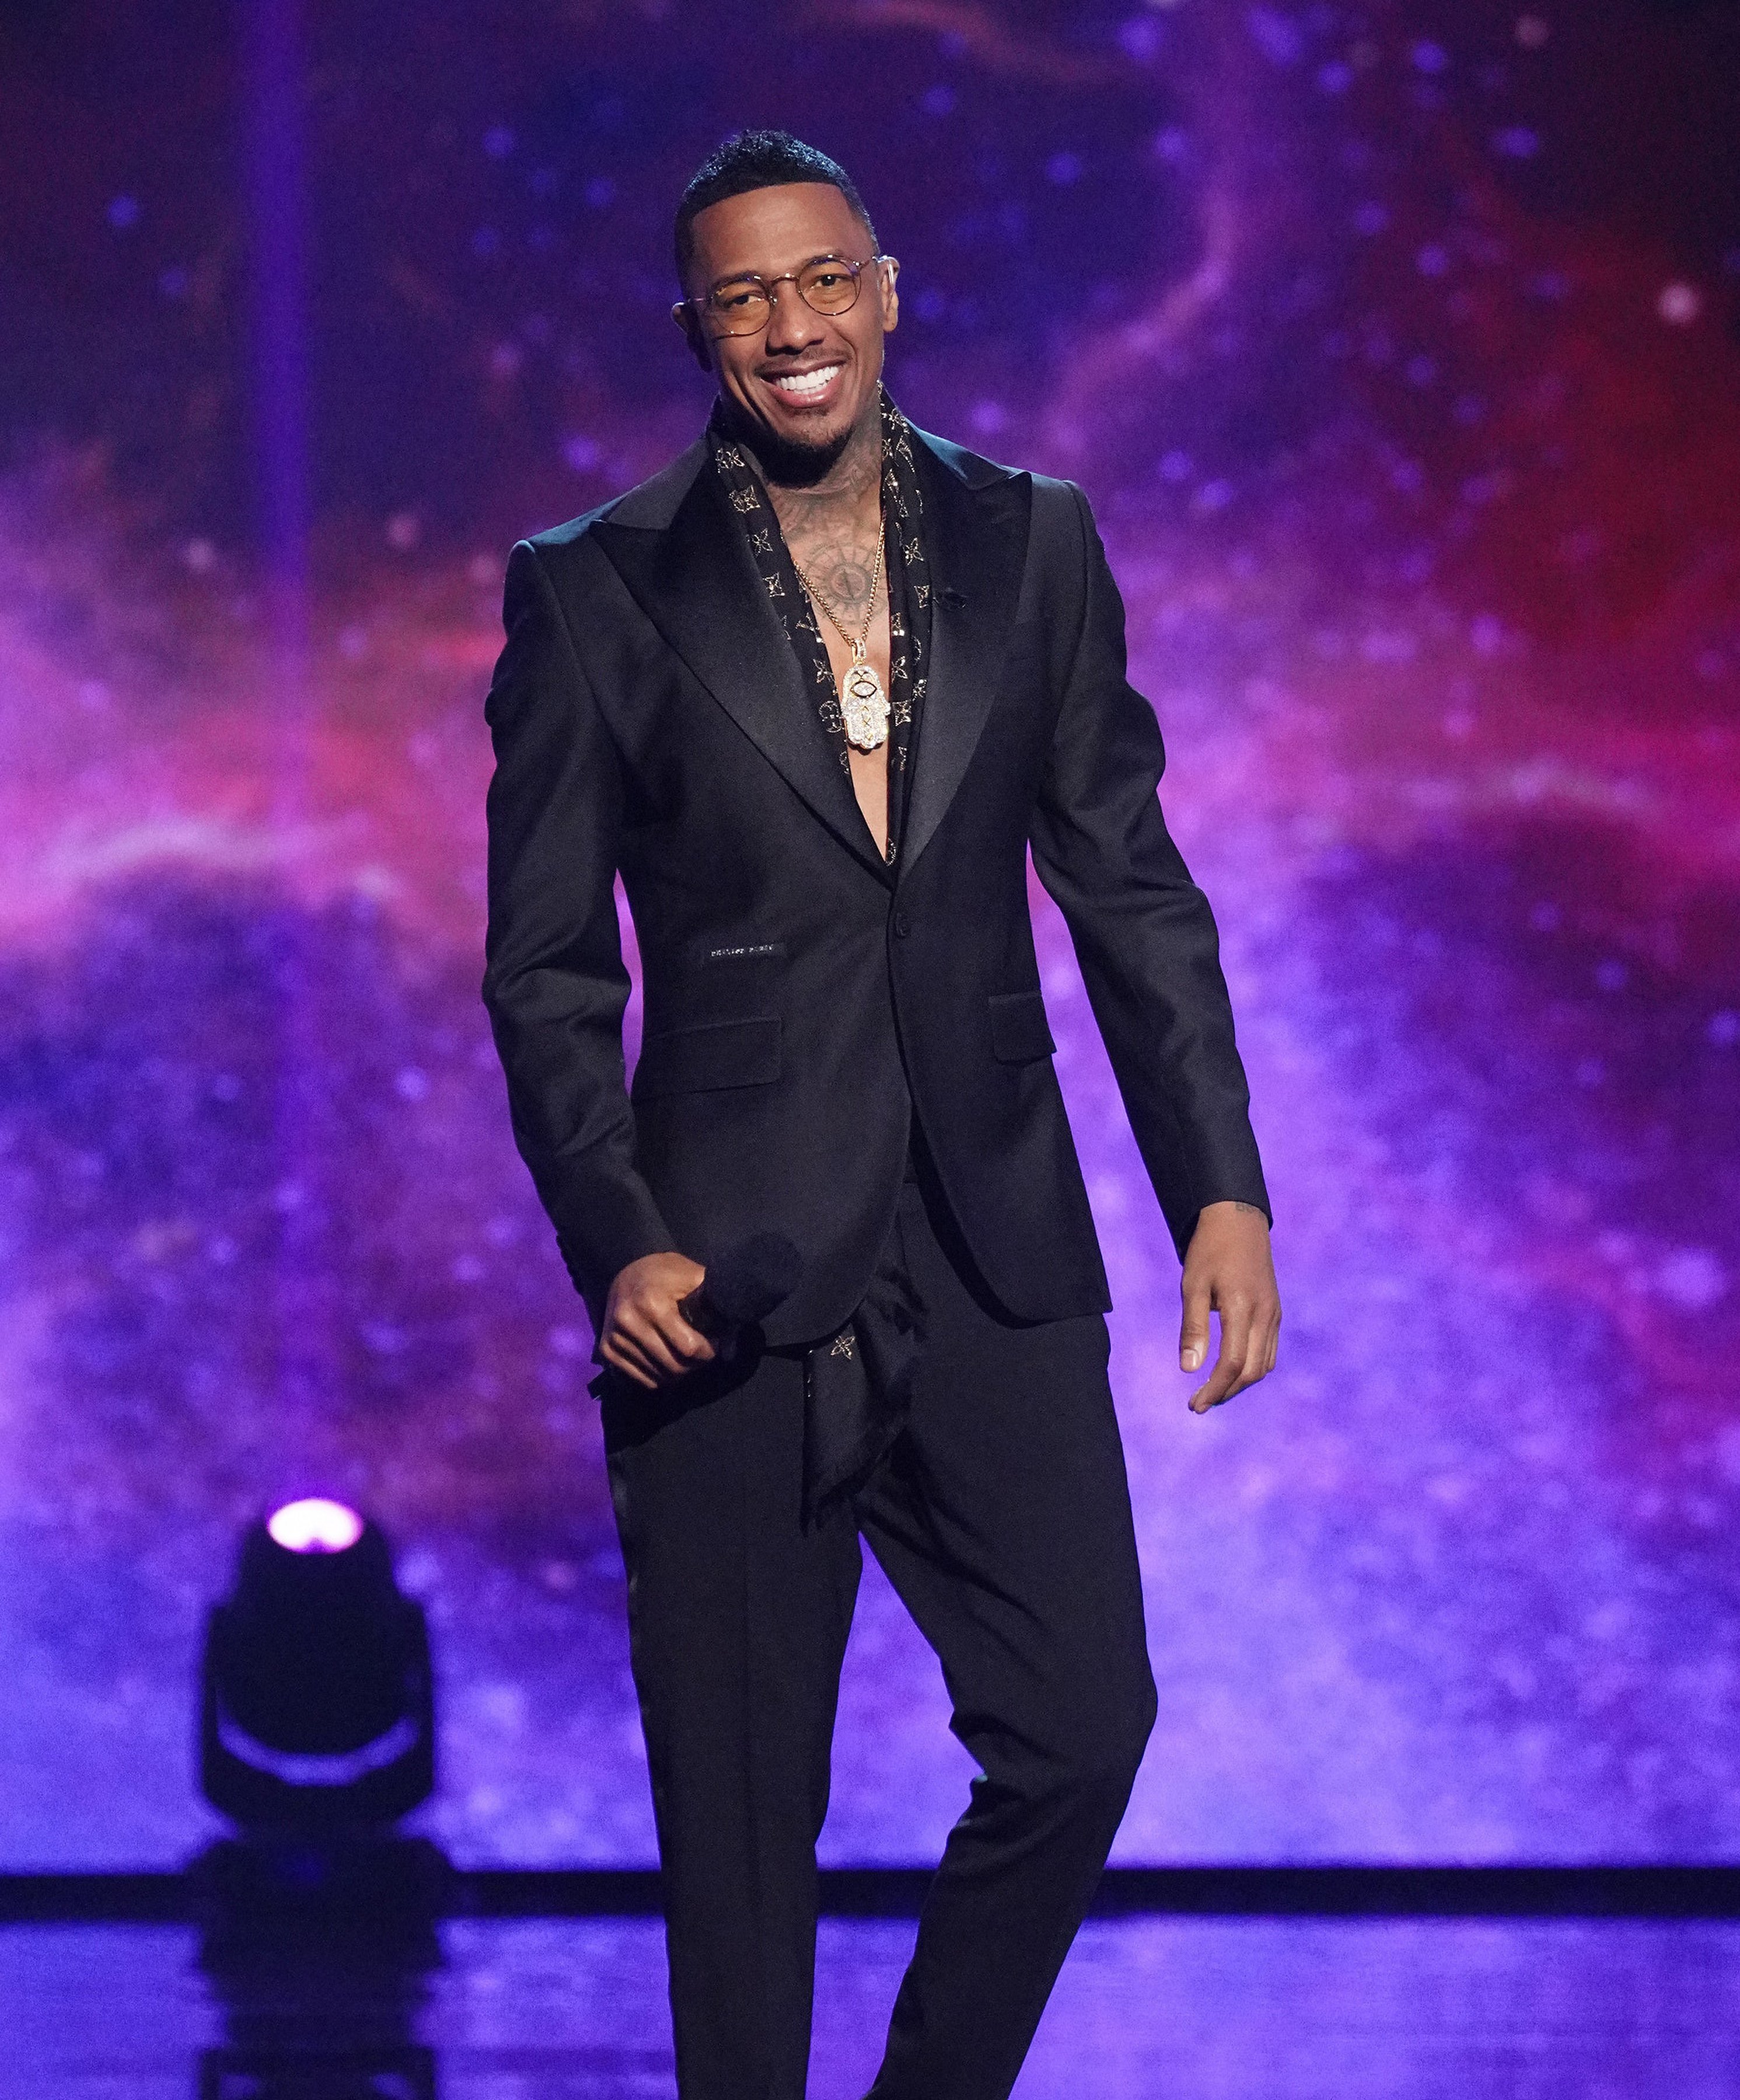 Host Nick Cannon in "The Masked Singer" episode on FOX. | Source: Getty Images